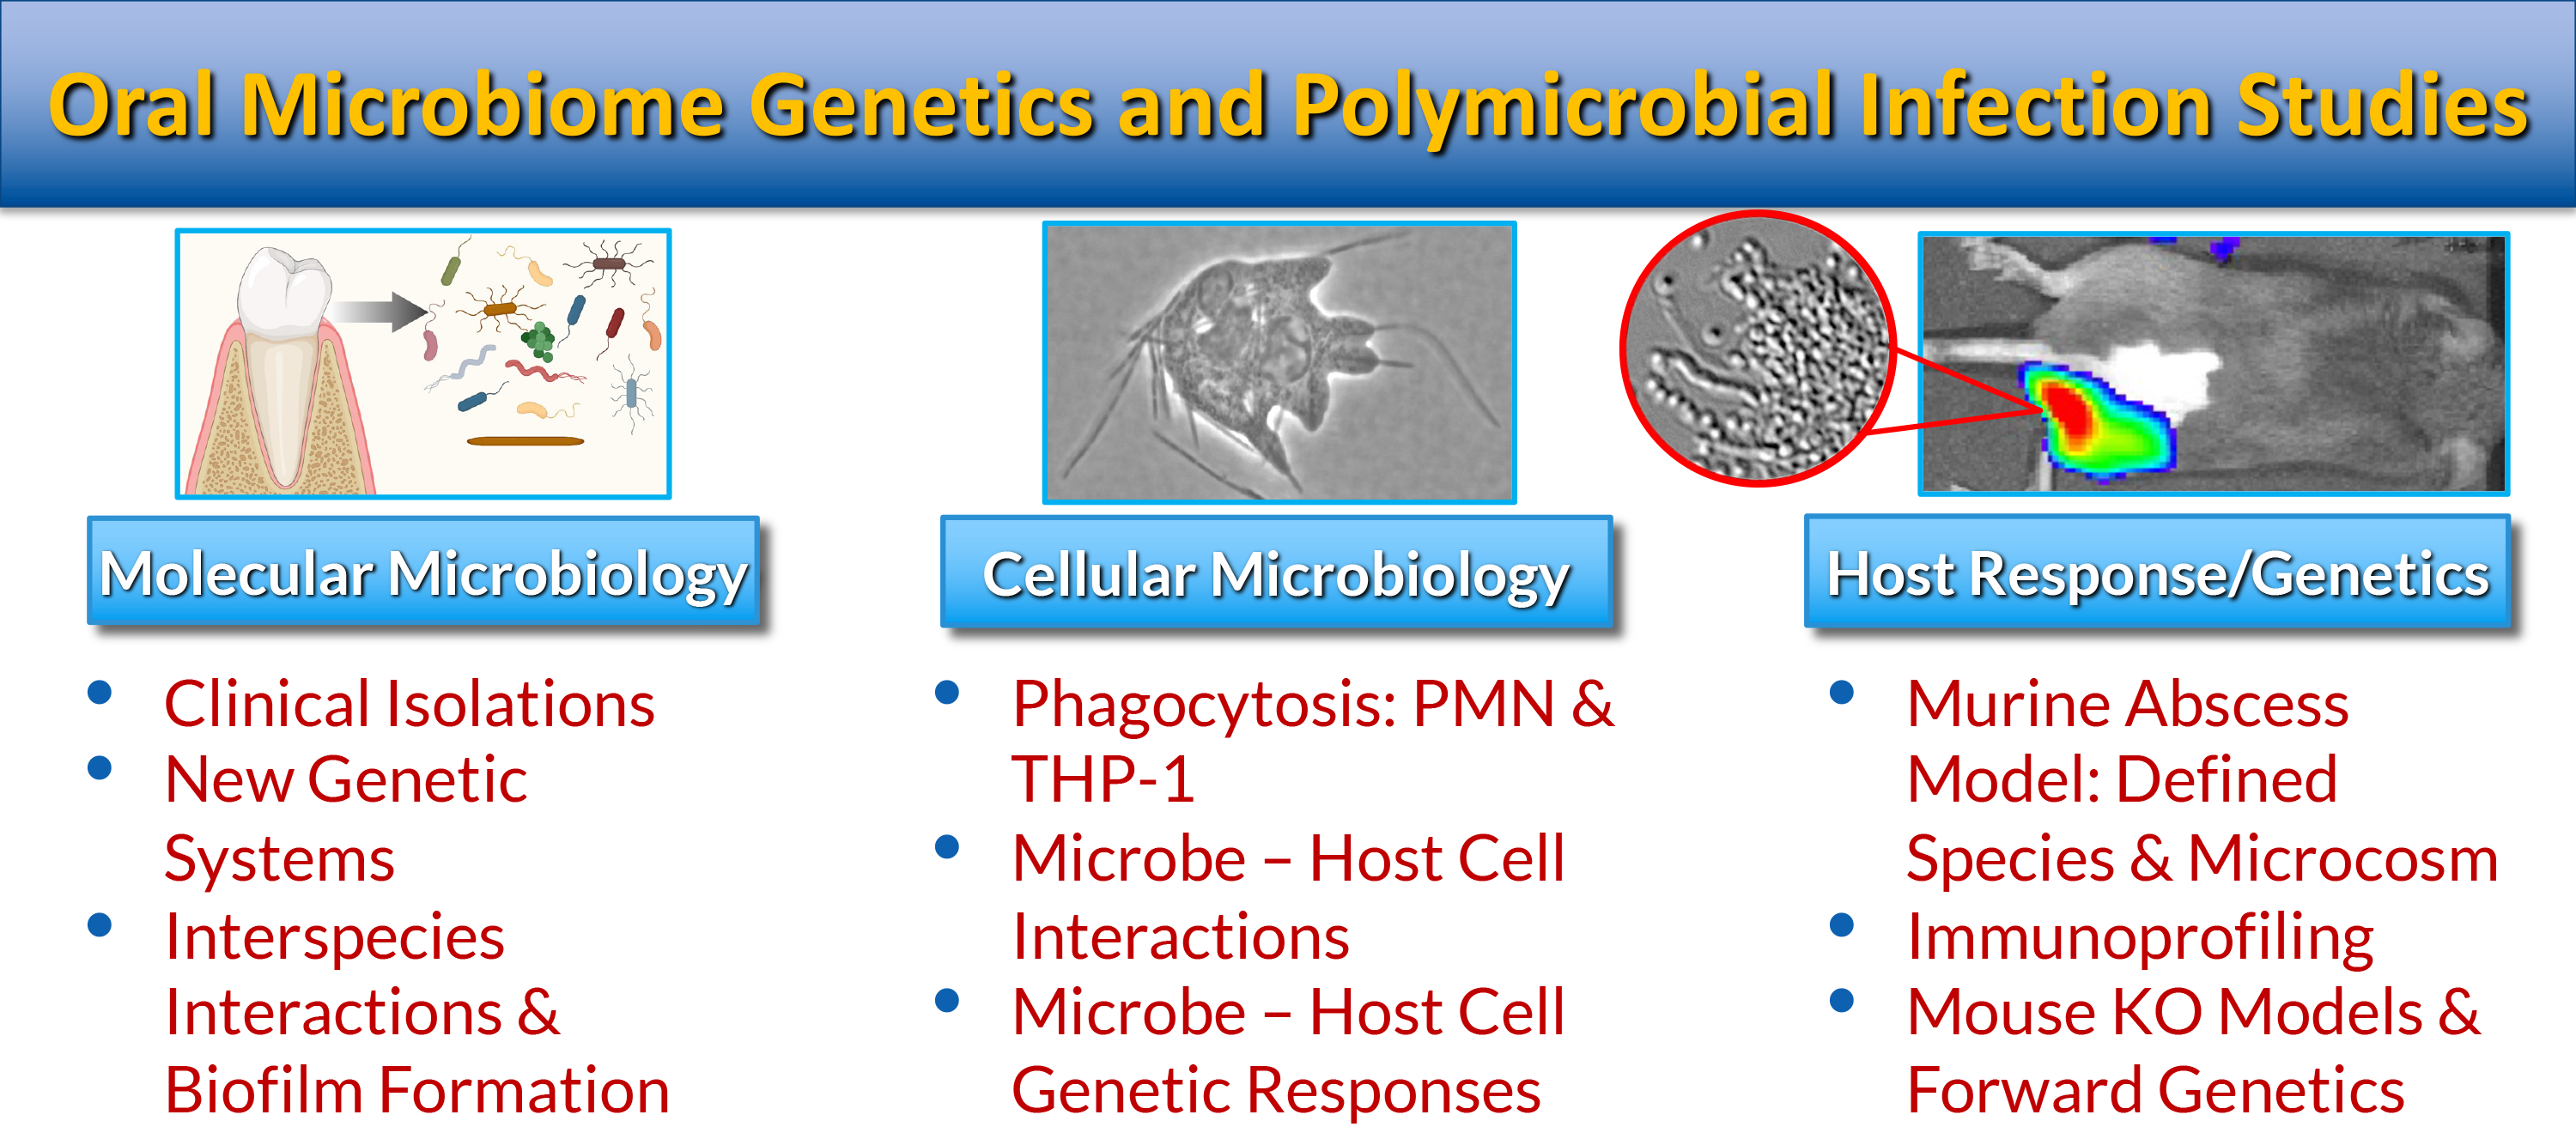 Merritt Lab graphic showing Oral Microbiome Genetics and Polymicrobial Infection Studies